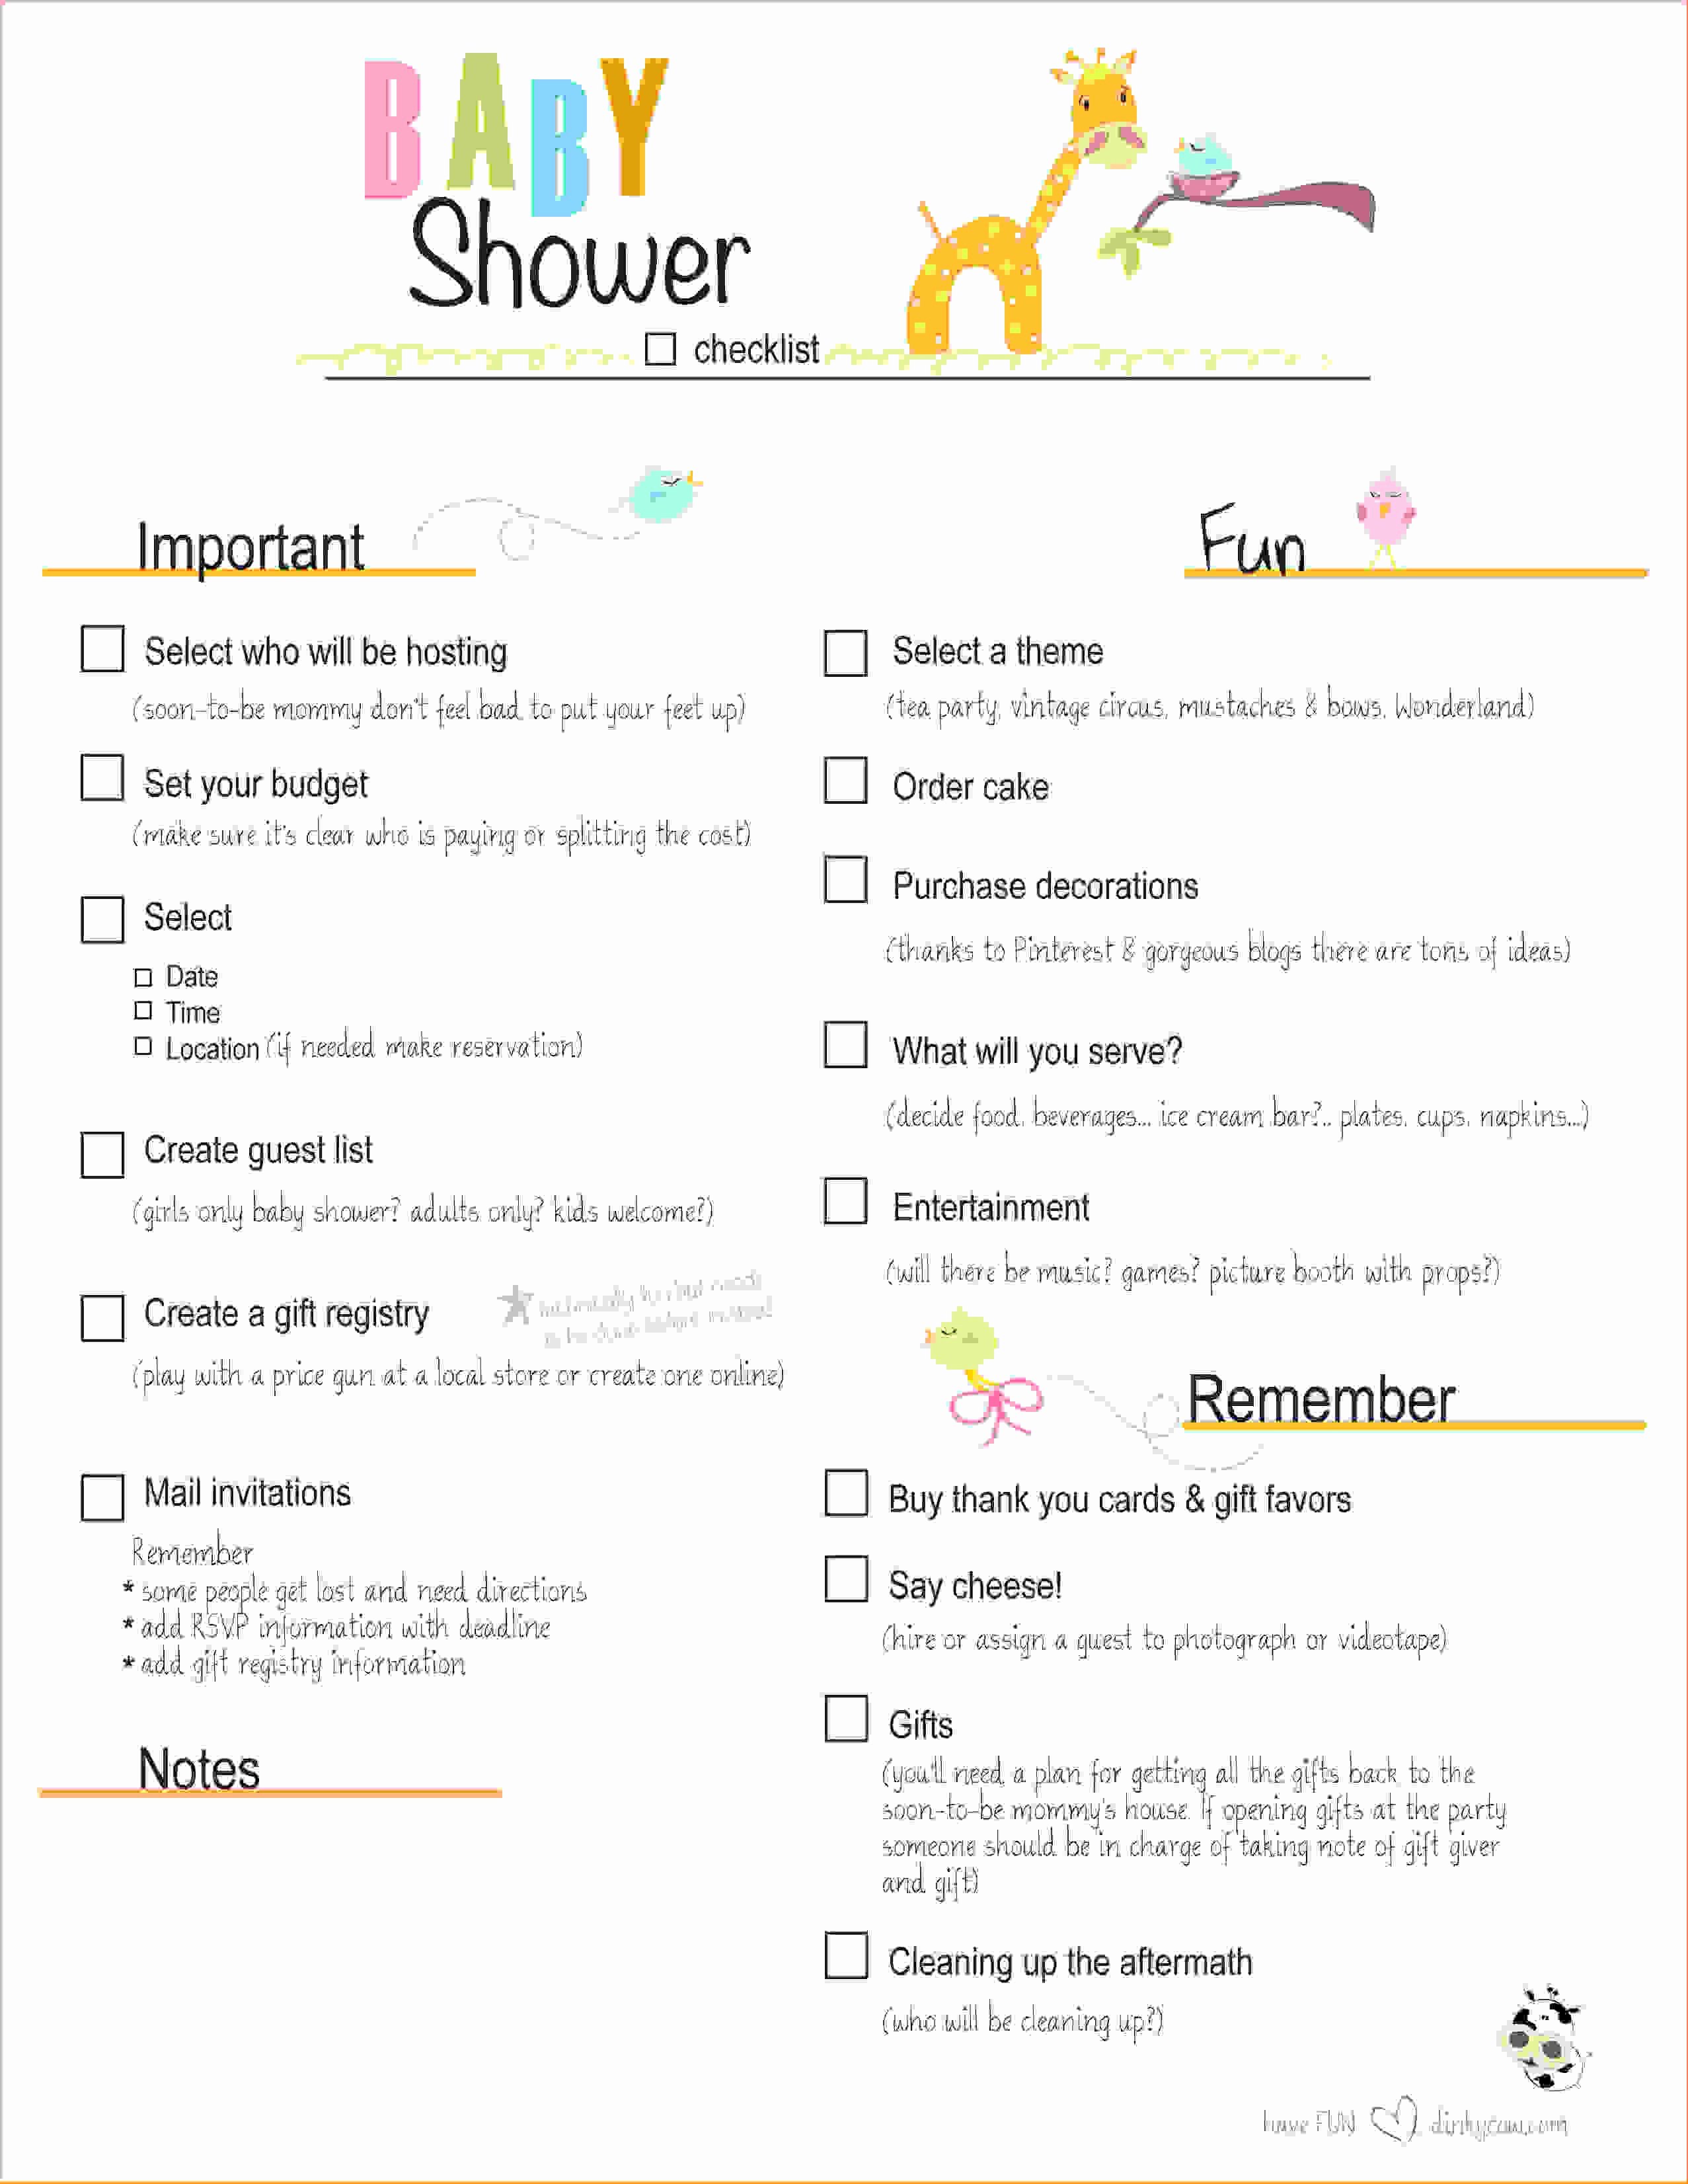 Baby Shower Checklist Template New Sample Baby Shower Checklist Template Watch More Like